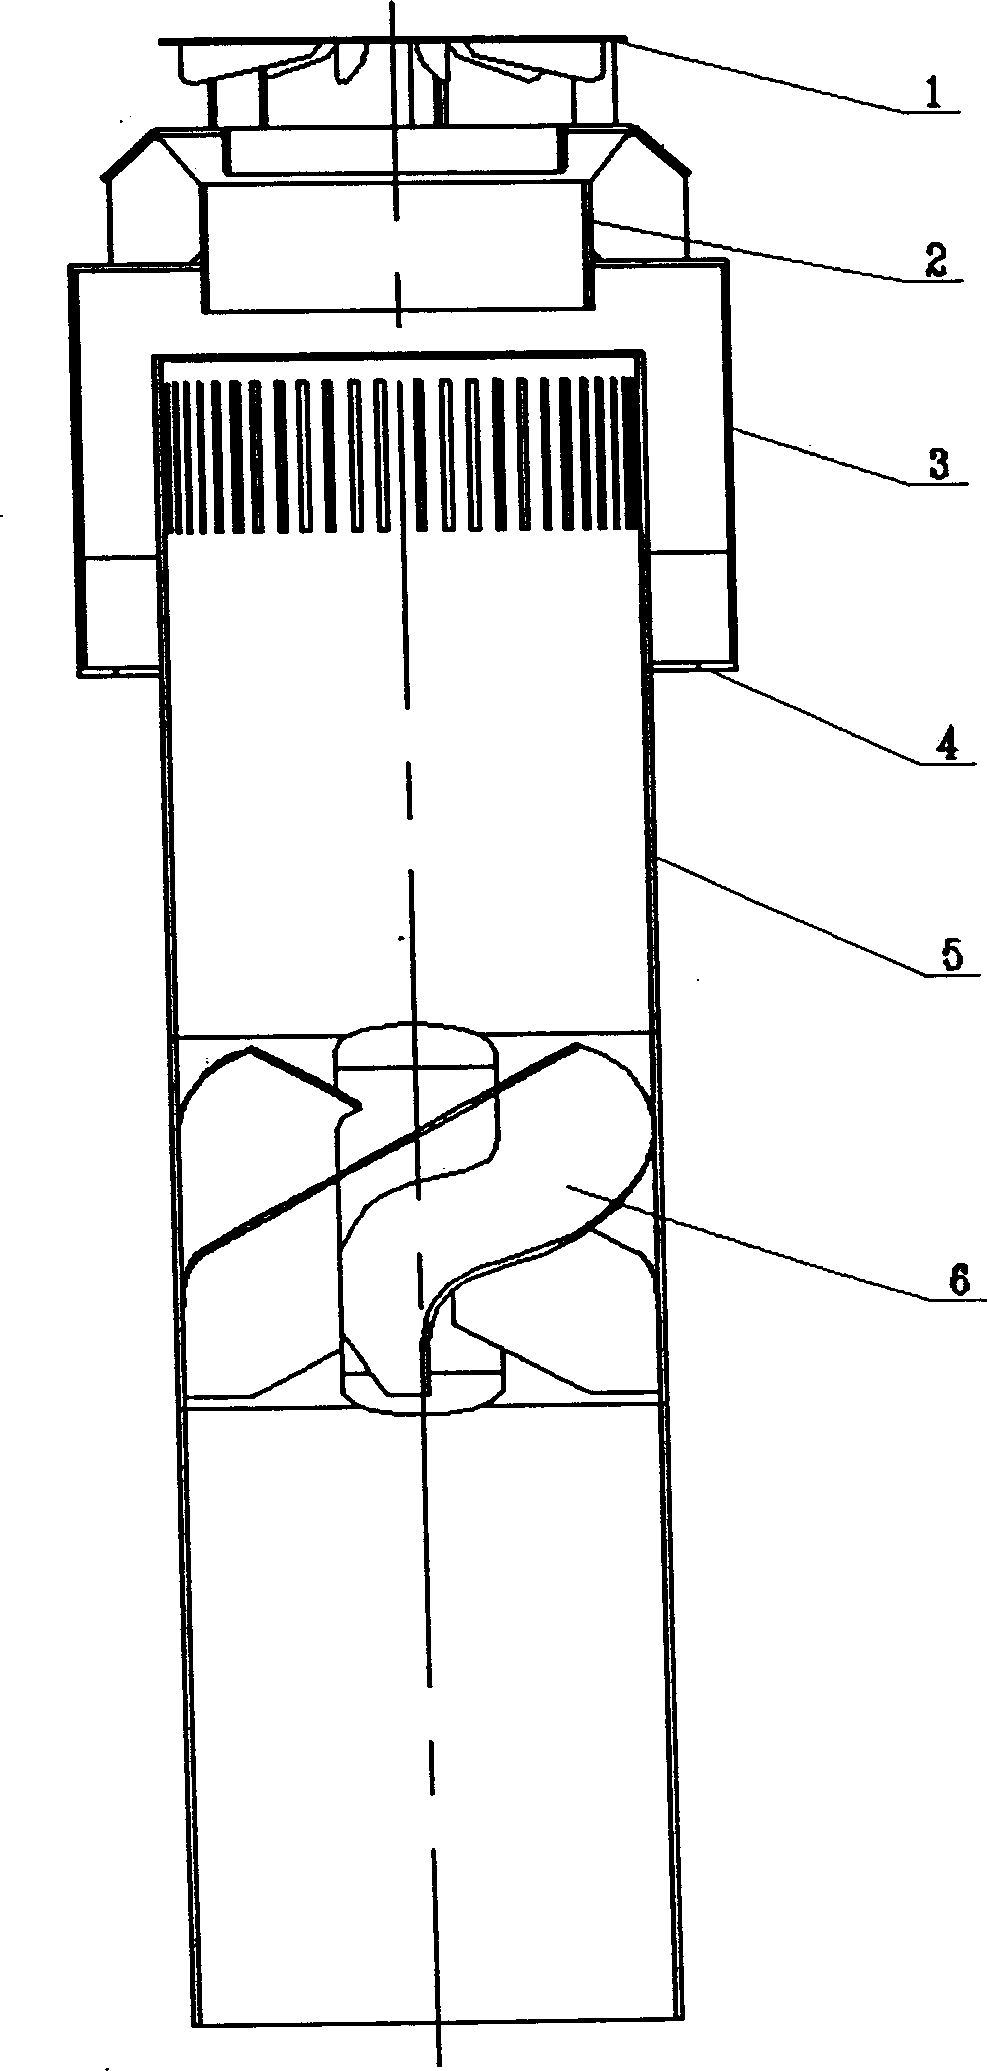 Vapour and water separator